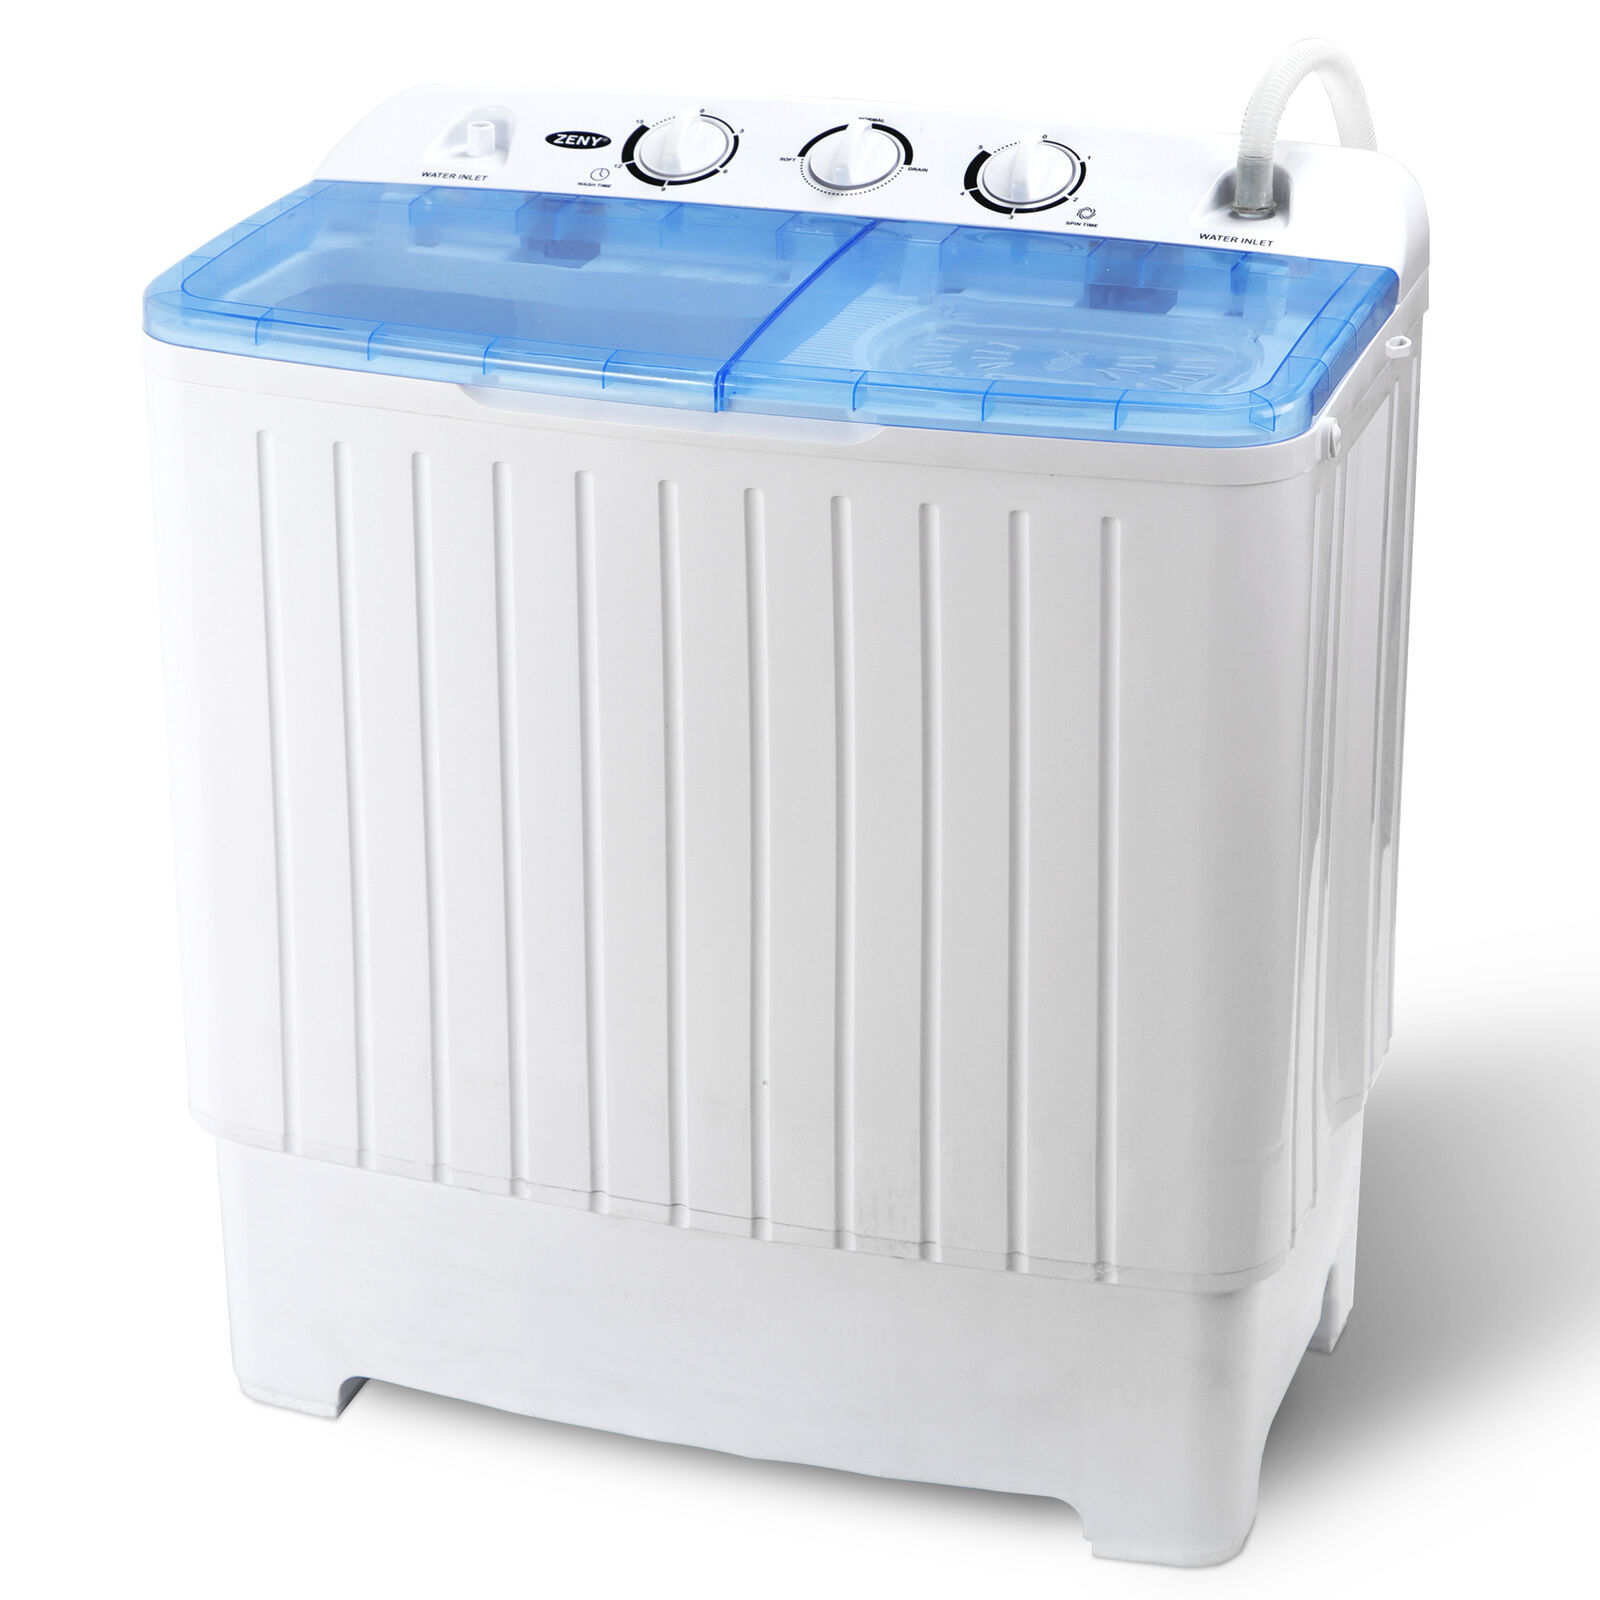 Primary image for 17.6Lbs Portable Washing Machine Mini Compact Twin Tub Laundry Washer Spin Dryer